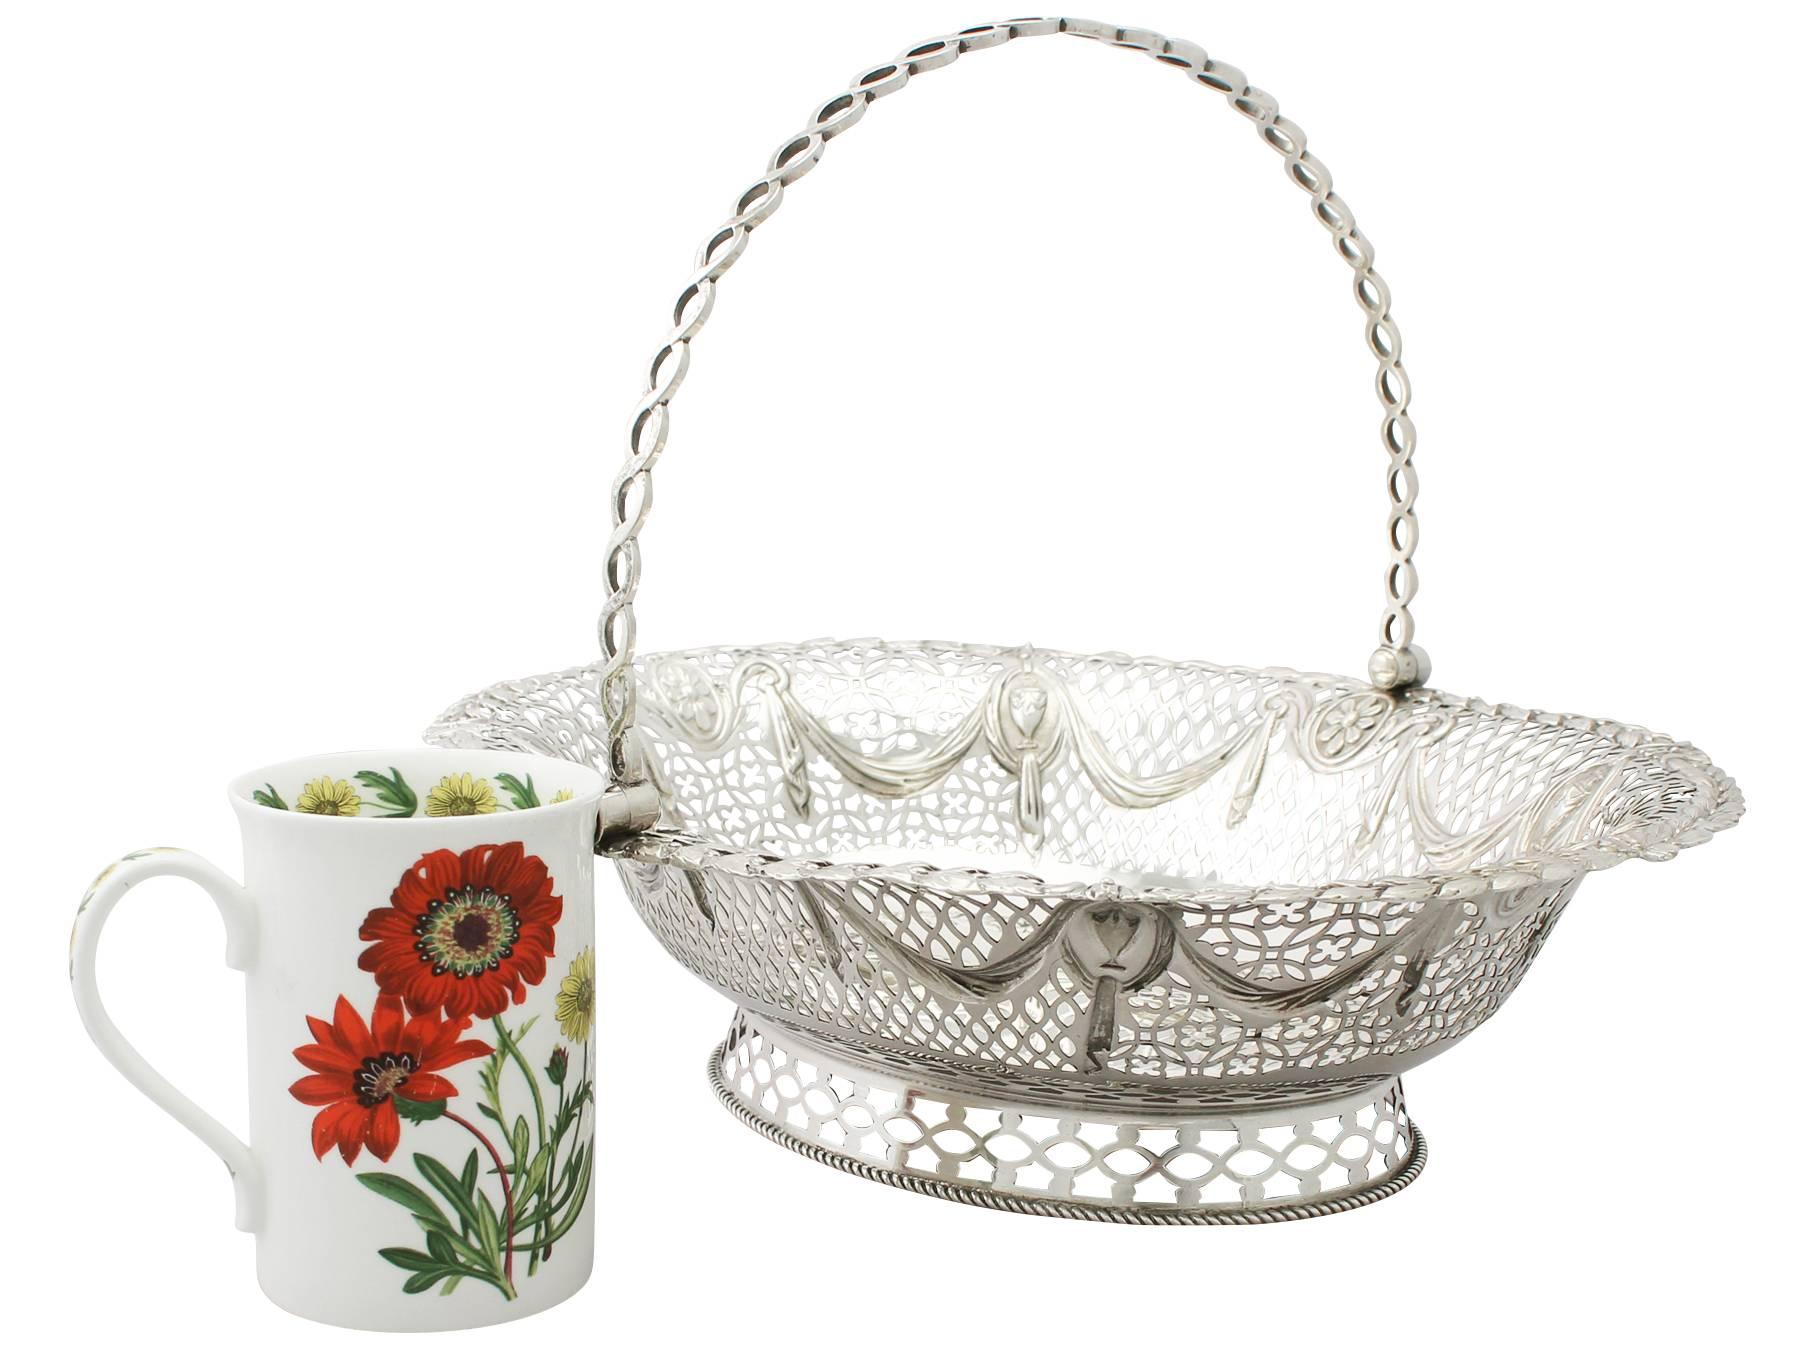 A fine and impressive antique Georgian English sterling silver swing handled cake basket; an addition to our dining silverware collection

This impressive George III sterling silver cake basket has an oval rounded form onto a collet style